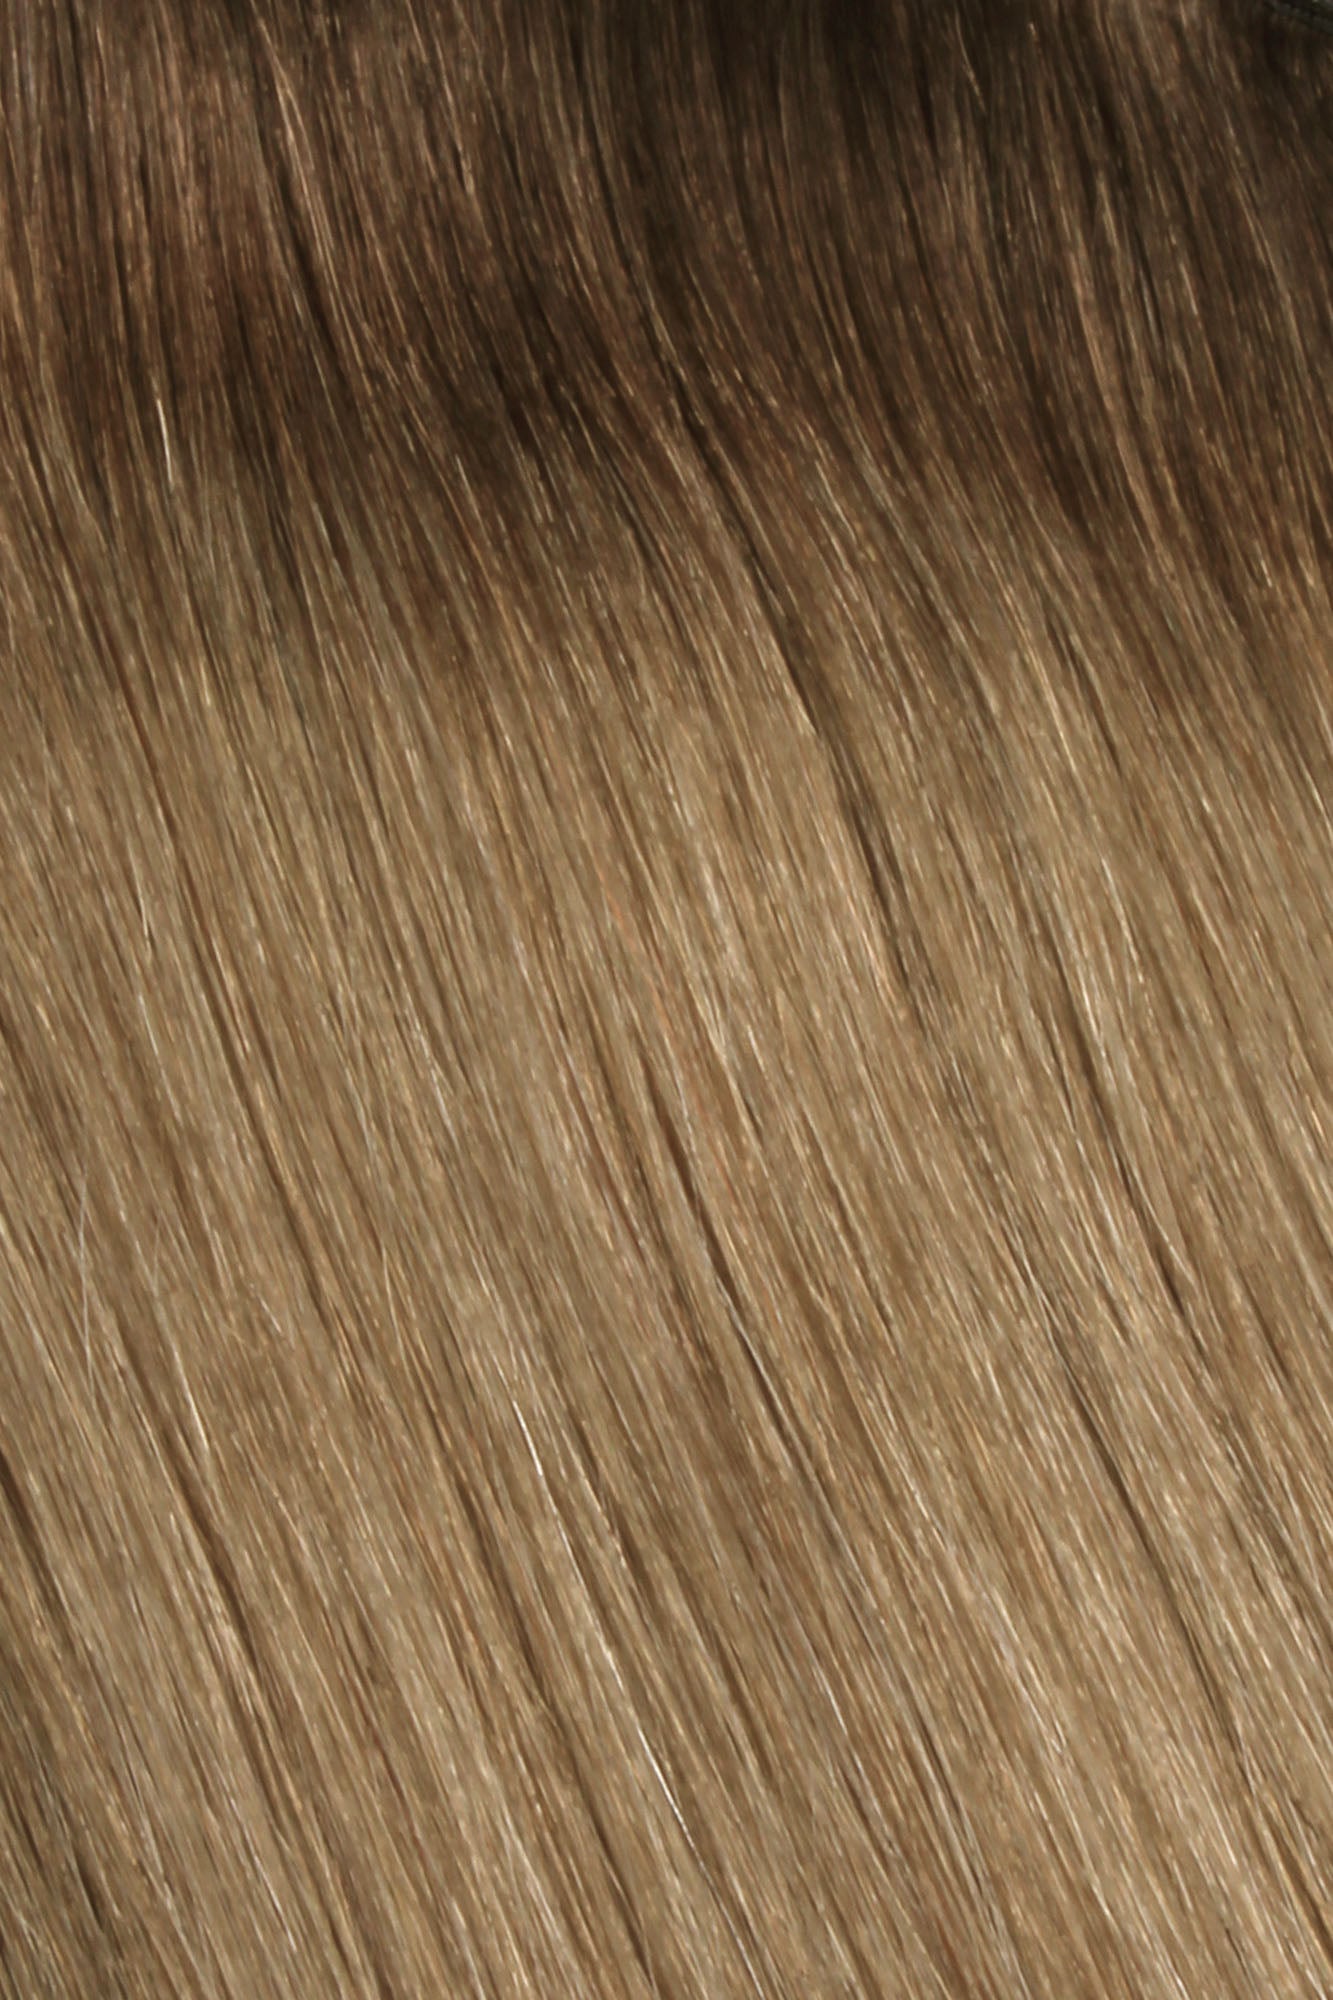 Nano Bonds 22 Inches - SWAY Hair Extensions Rooted-Champagne-Chestnut-R5-8-22 Ultra-fine, invisible bonds for a flawless, natural look. 100% Remy Human hair, lightweight and versatile. Reusable and perfect for individual or salon use.